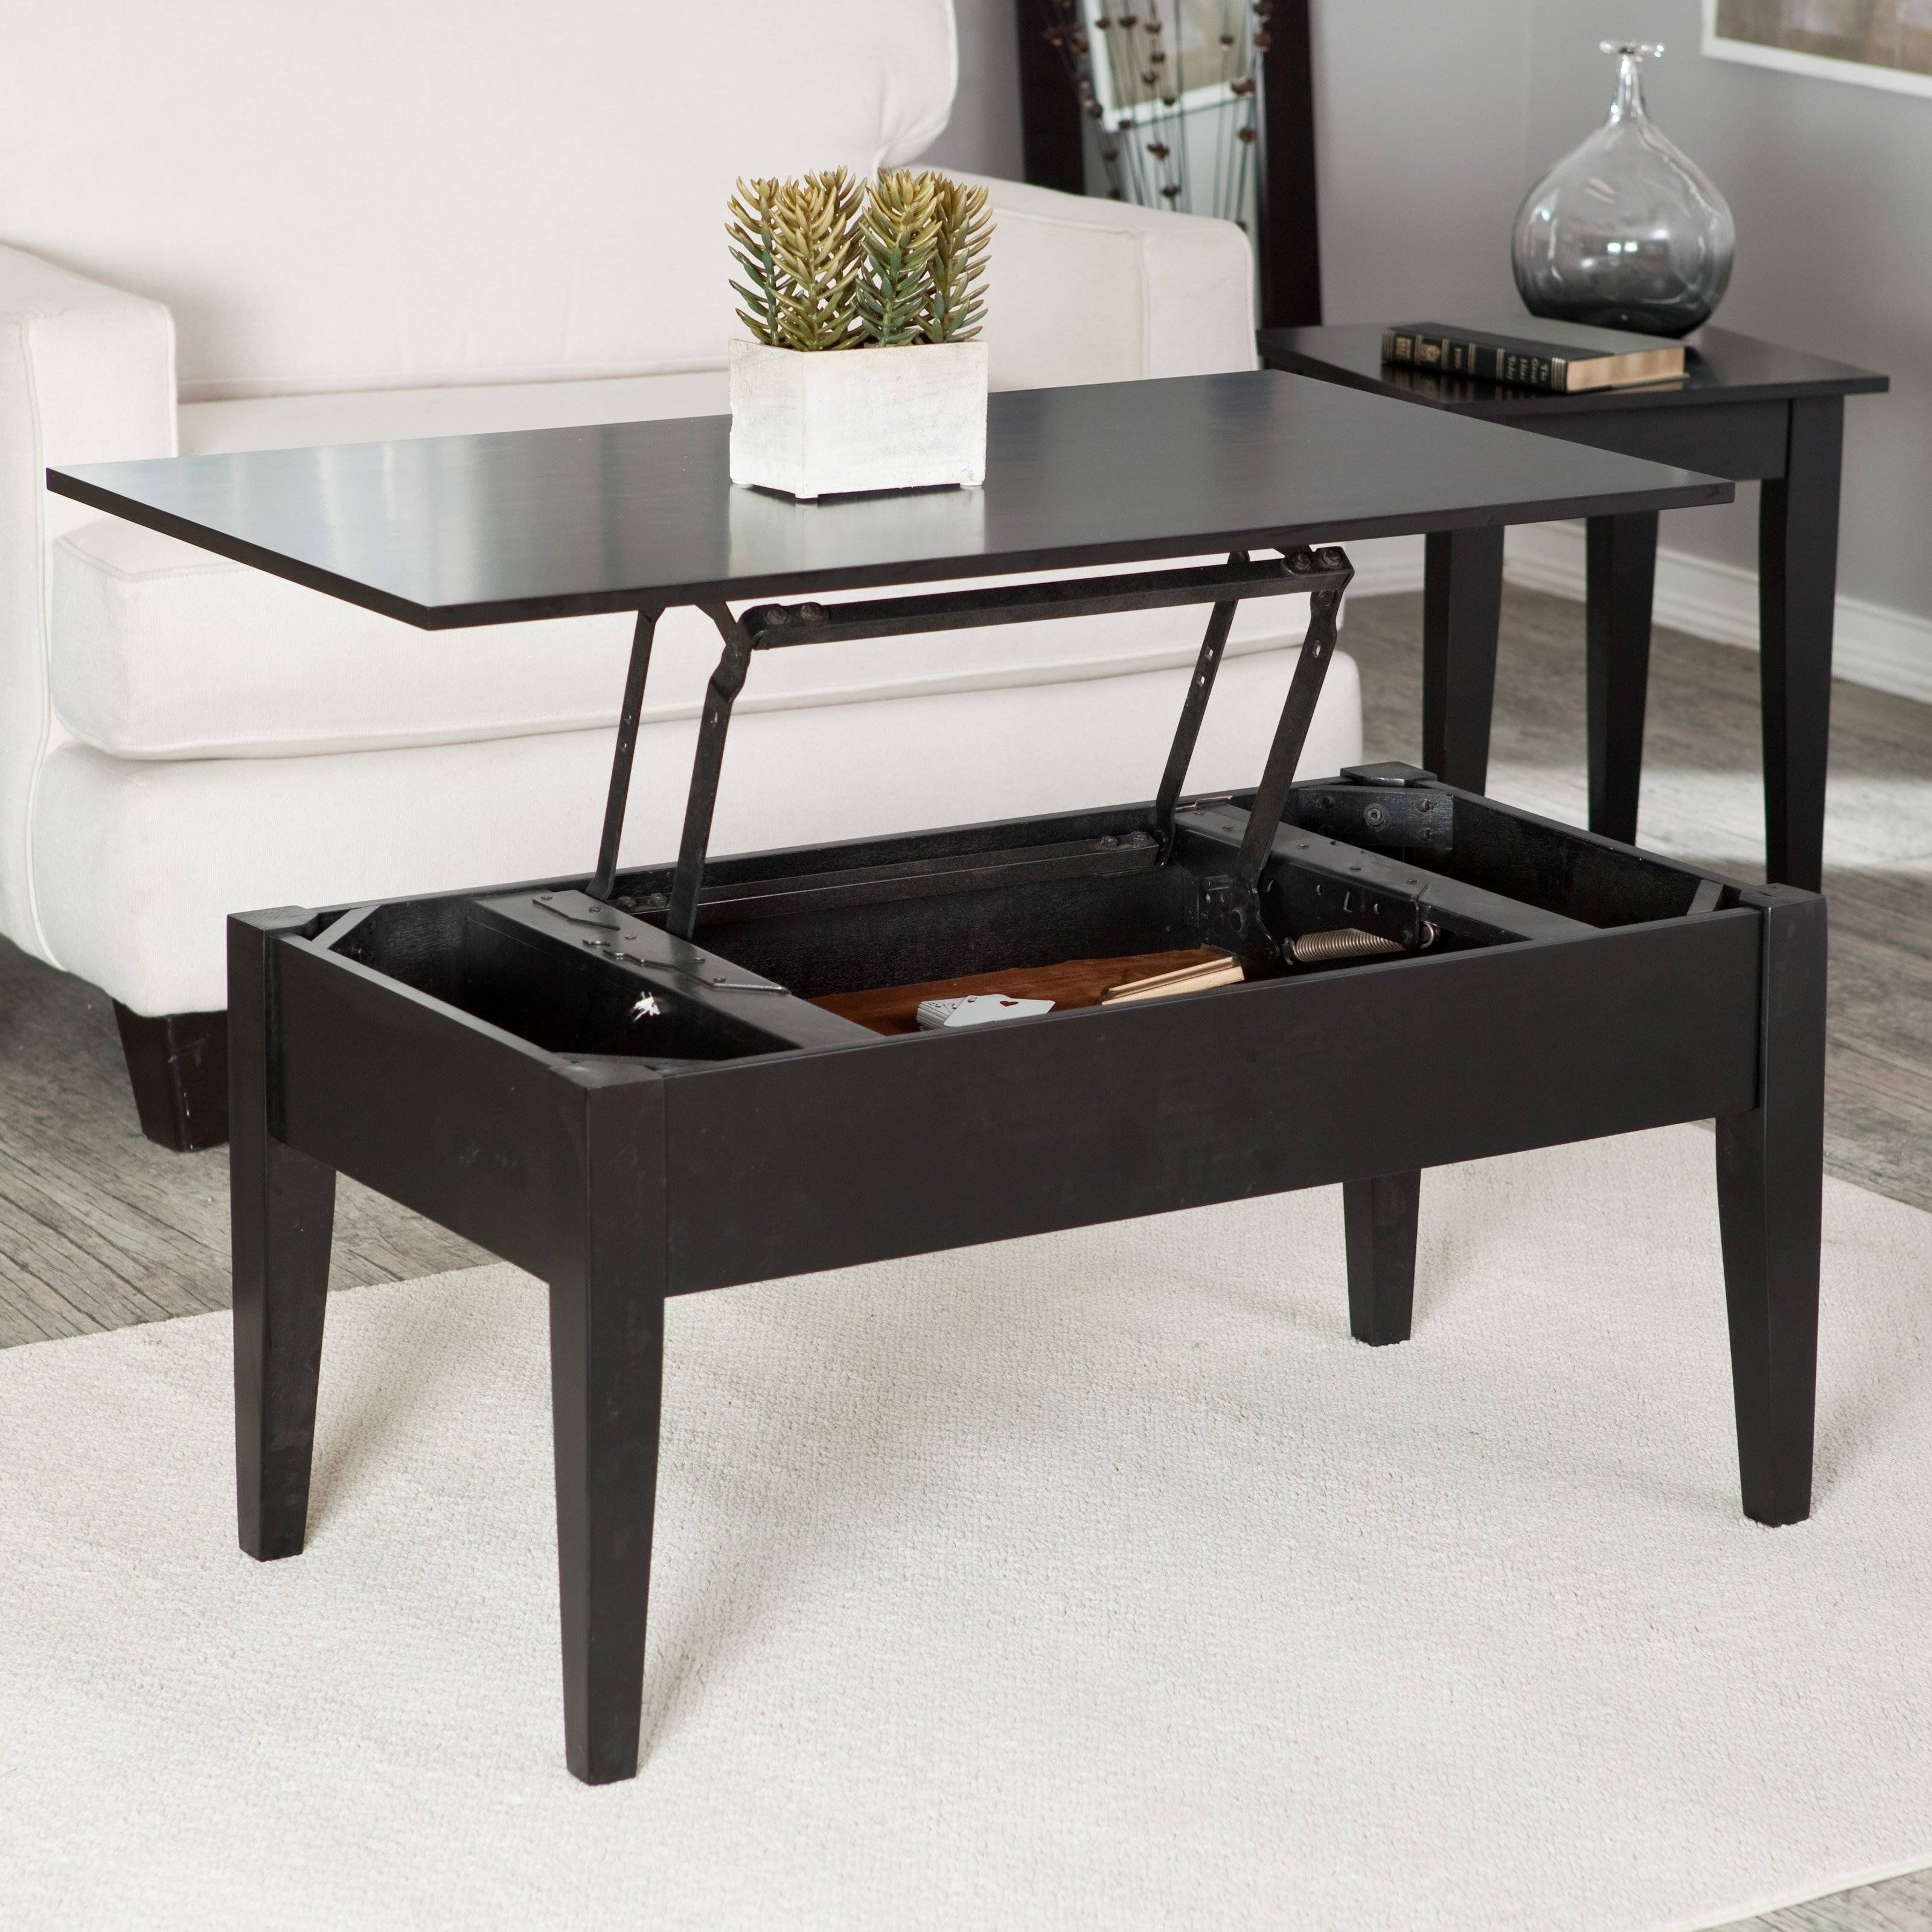 Turner Lift Top Coffee Table – Black | Hayneedle For Lift Top Oak Coffee Tables (View 28 of 30)